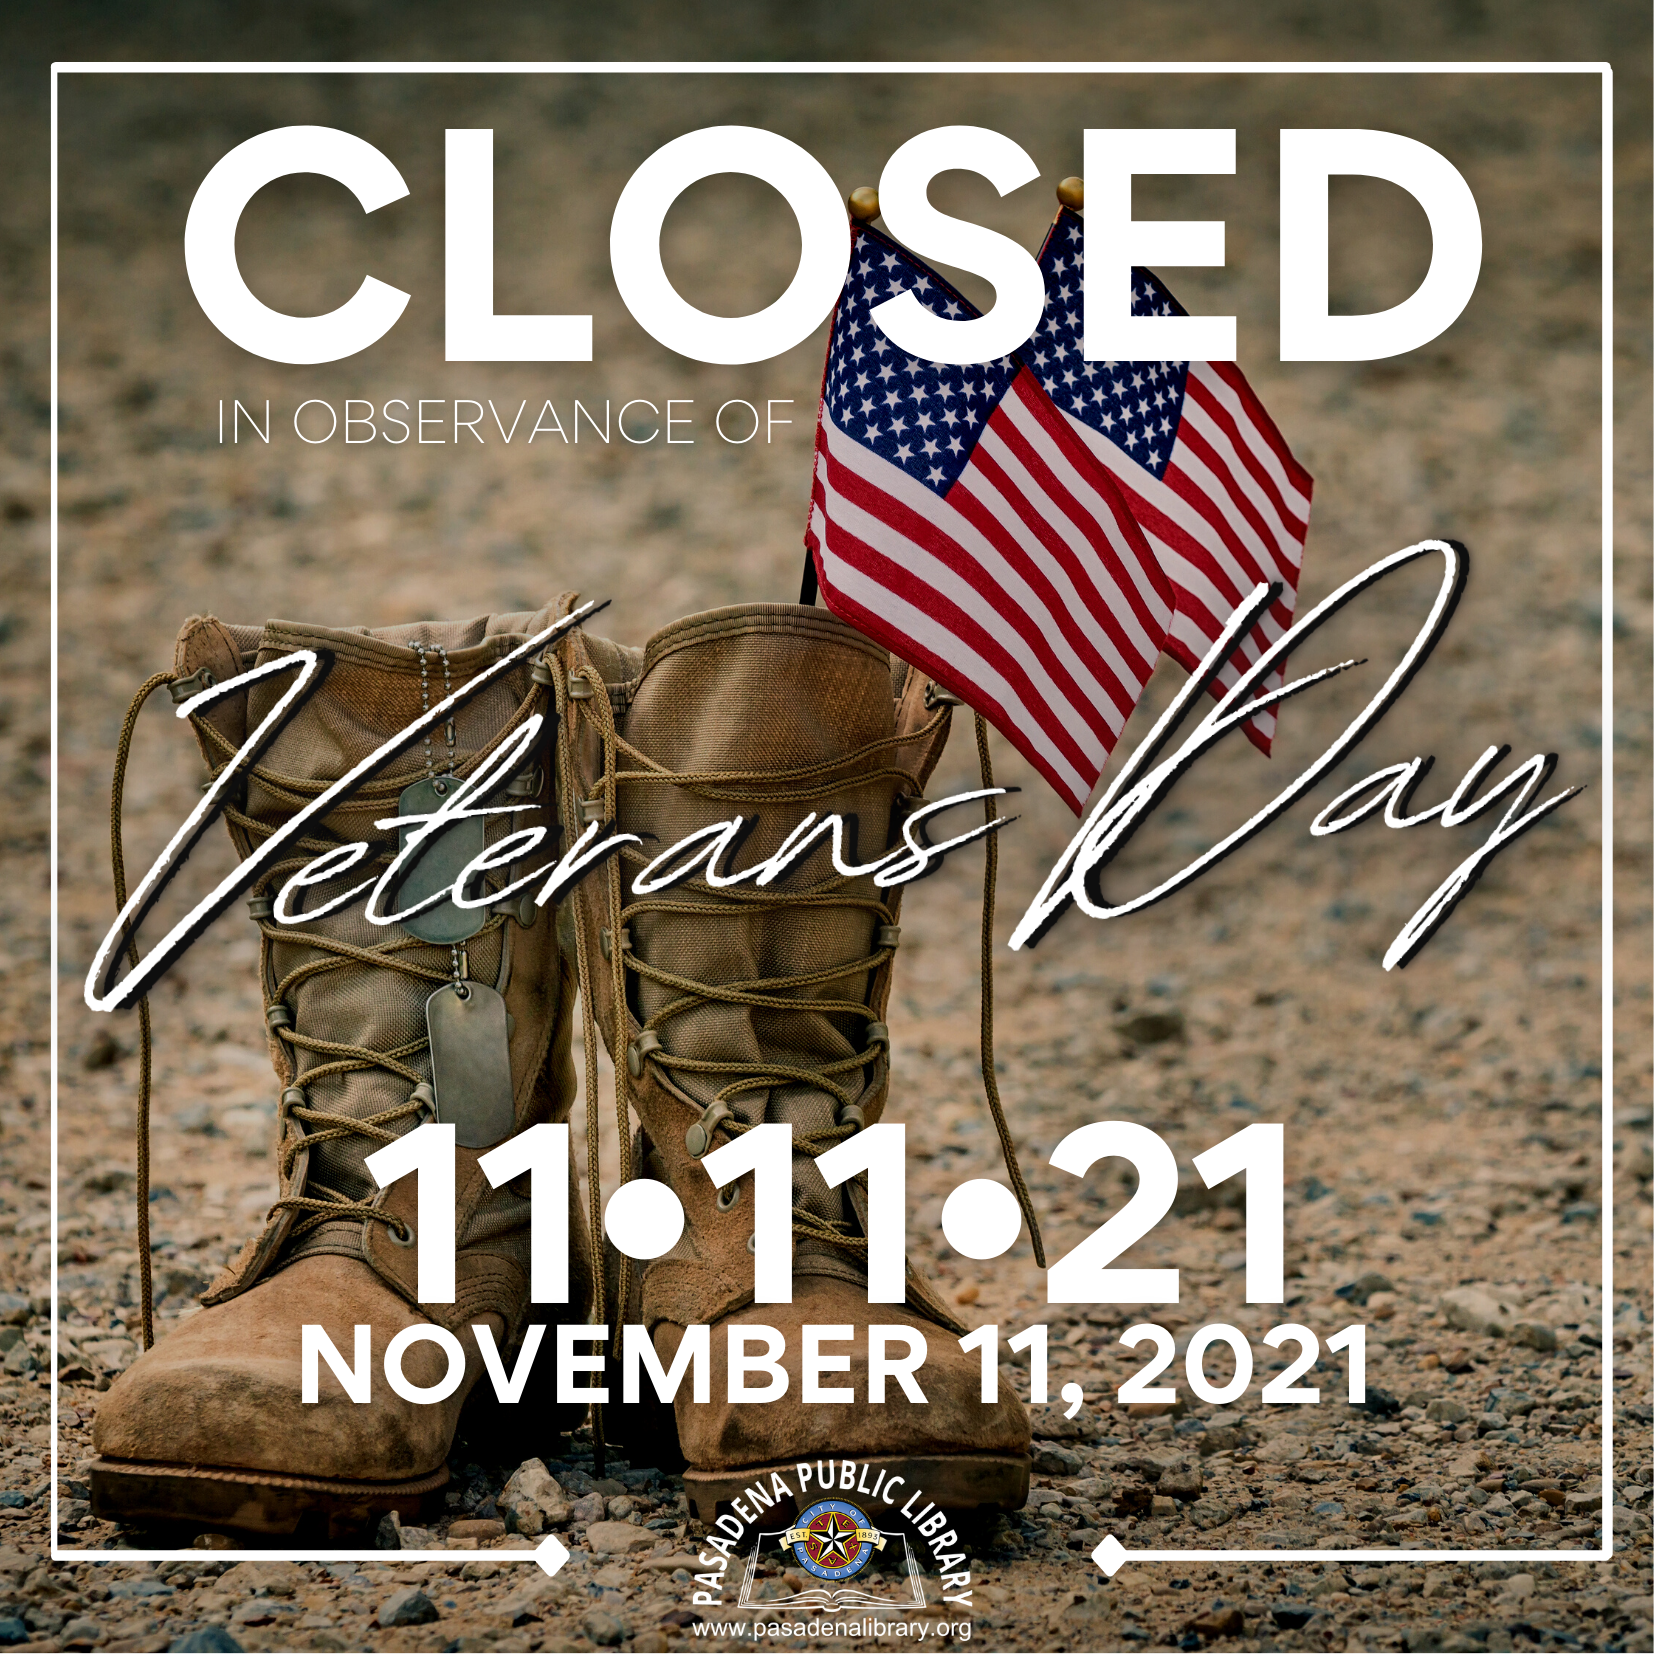 Closed In Observance of Veterans Day The Pasadena Public Library will be CLOSED on Wednesday, November 11, 2021 in observance of VETERANS DAY! Library locations will re-open on Friday, November 12 at 10:00AM.